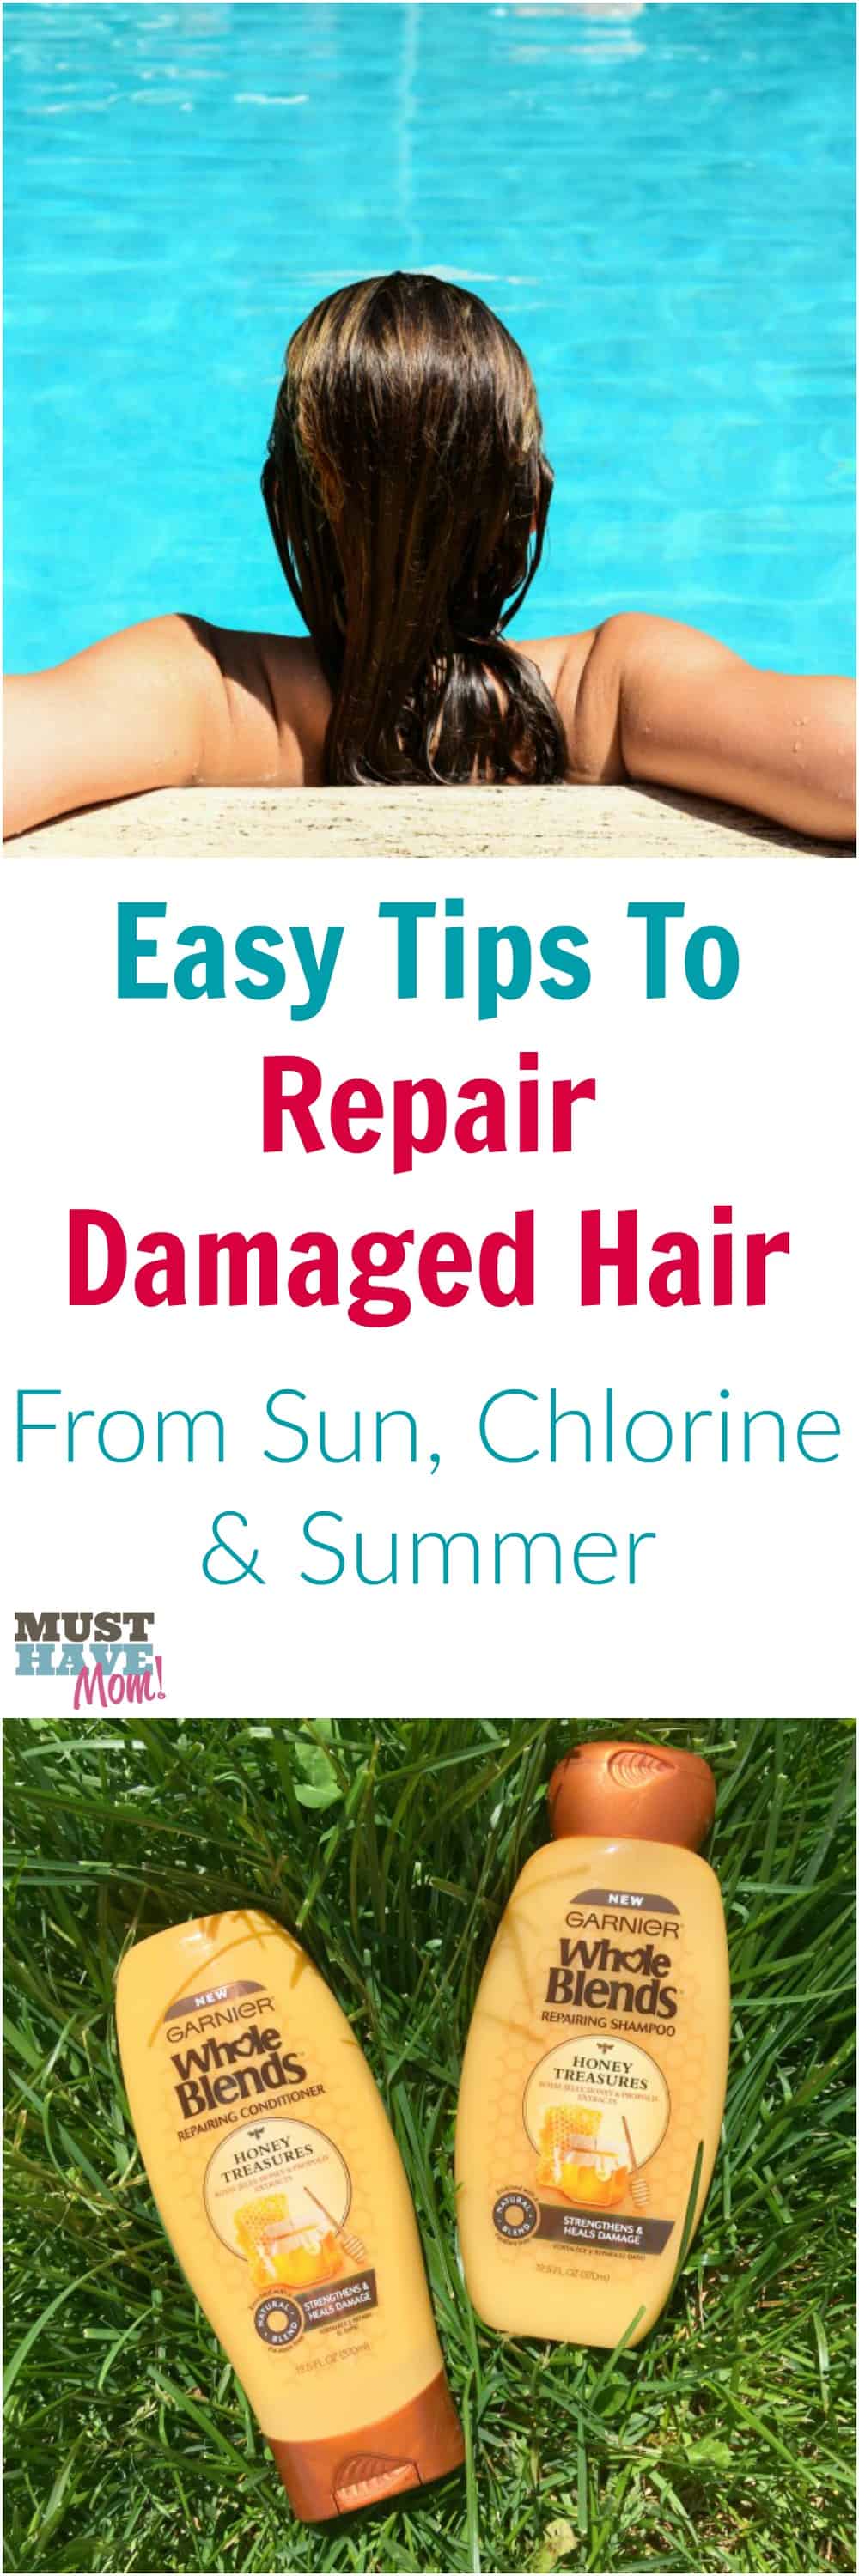 Easy way to repair hair that has been damaged by the sun or chlorine. Summer is hard on hair, use these easy tips to repair and restore your hair!